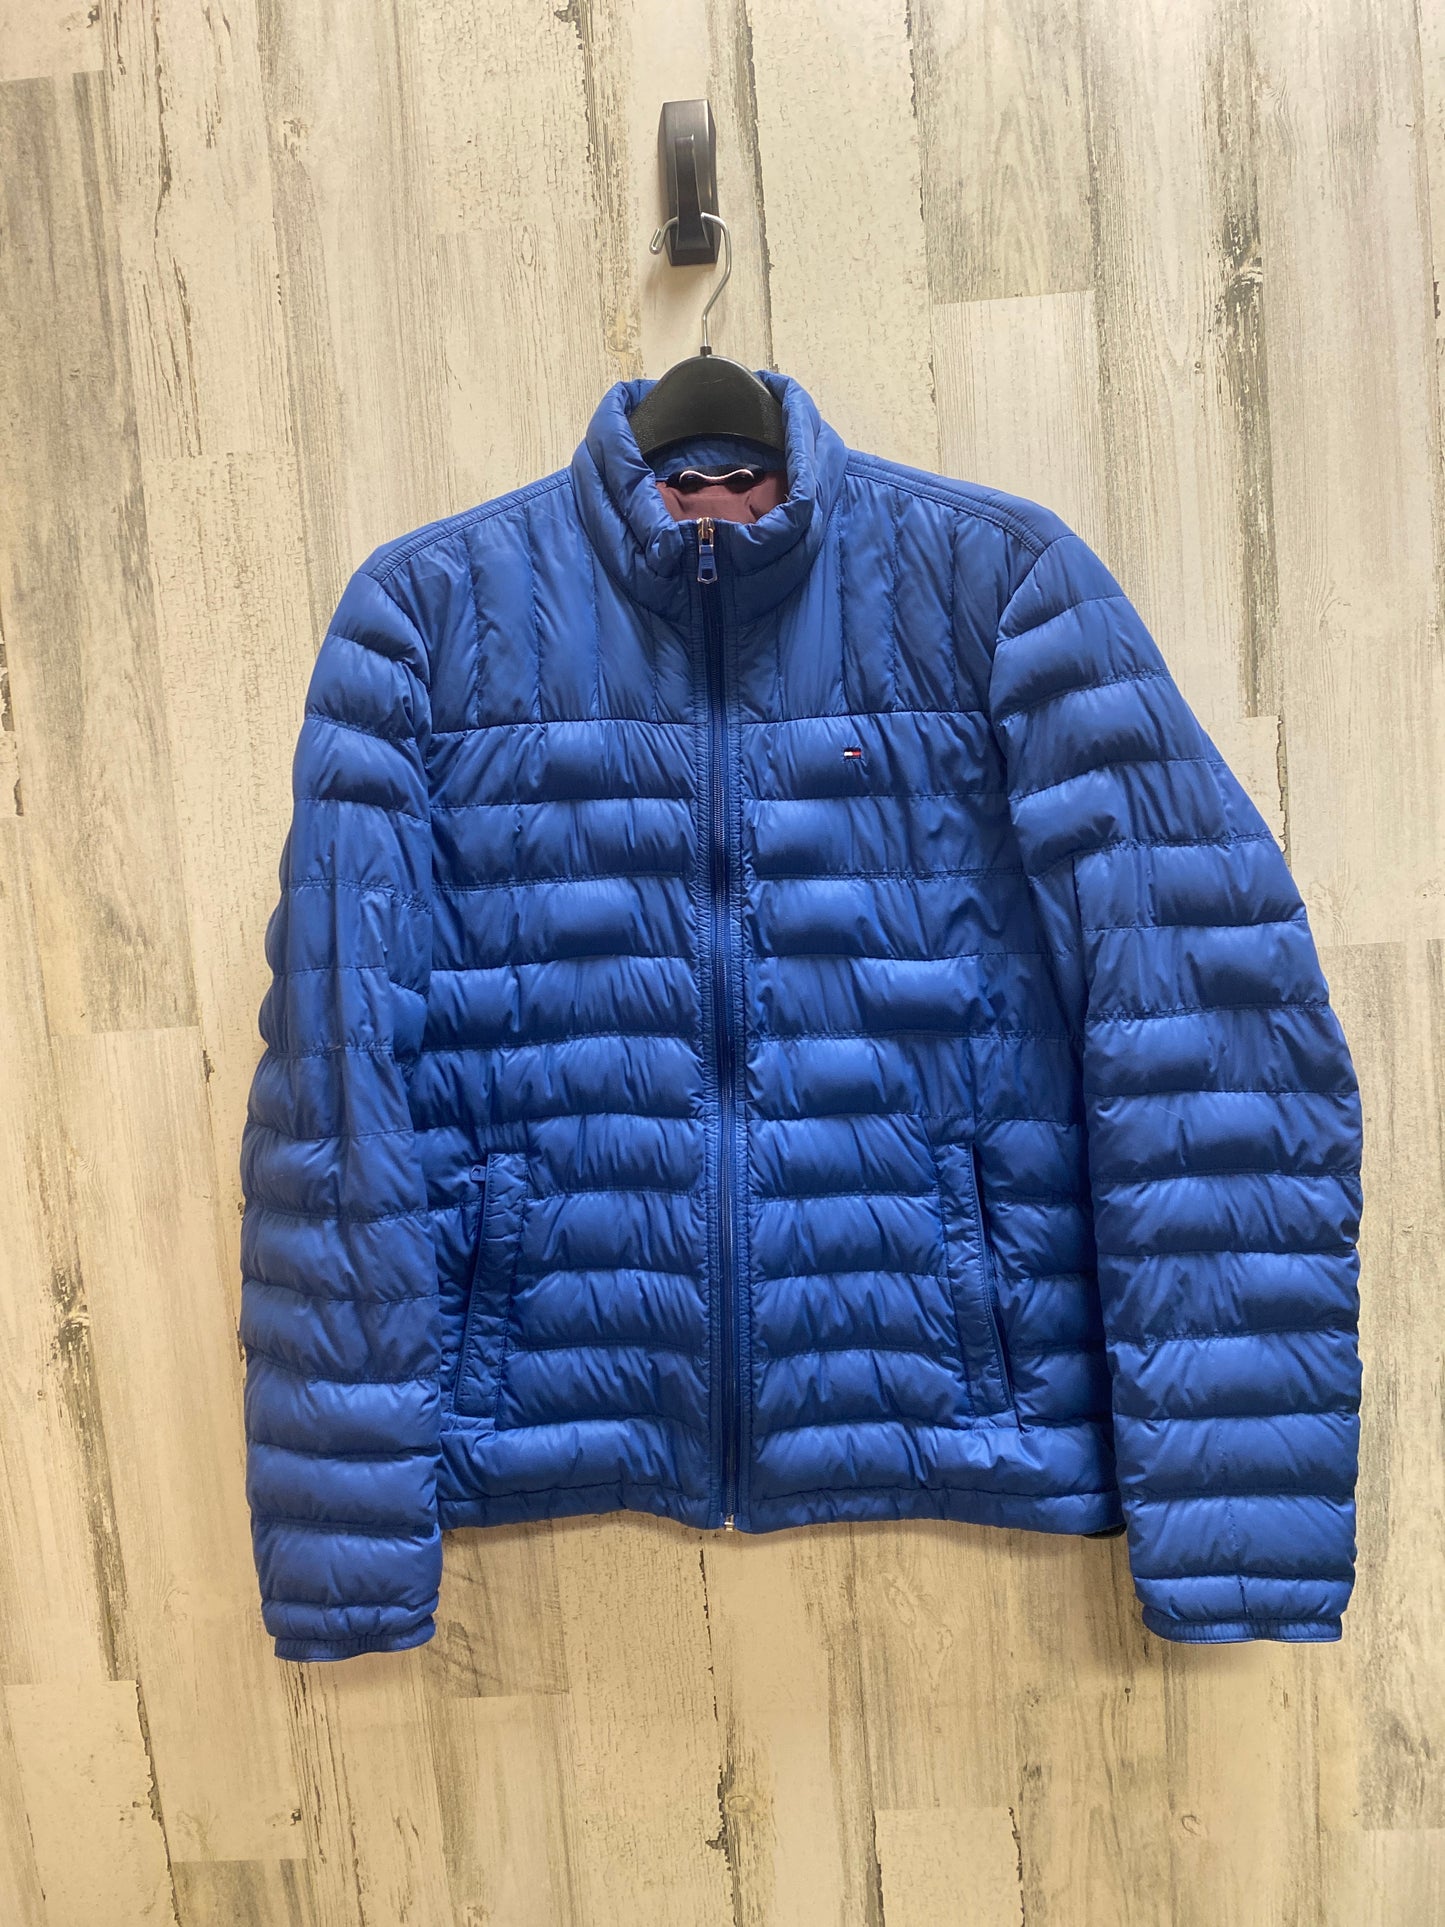 Coat Other By Tommy Hilfiger  Size: M